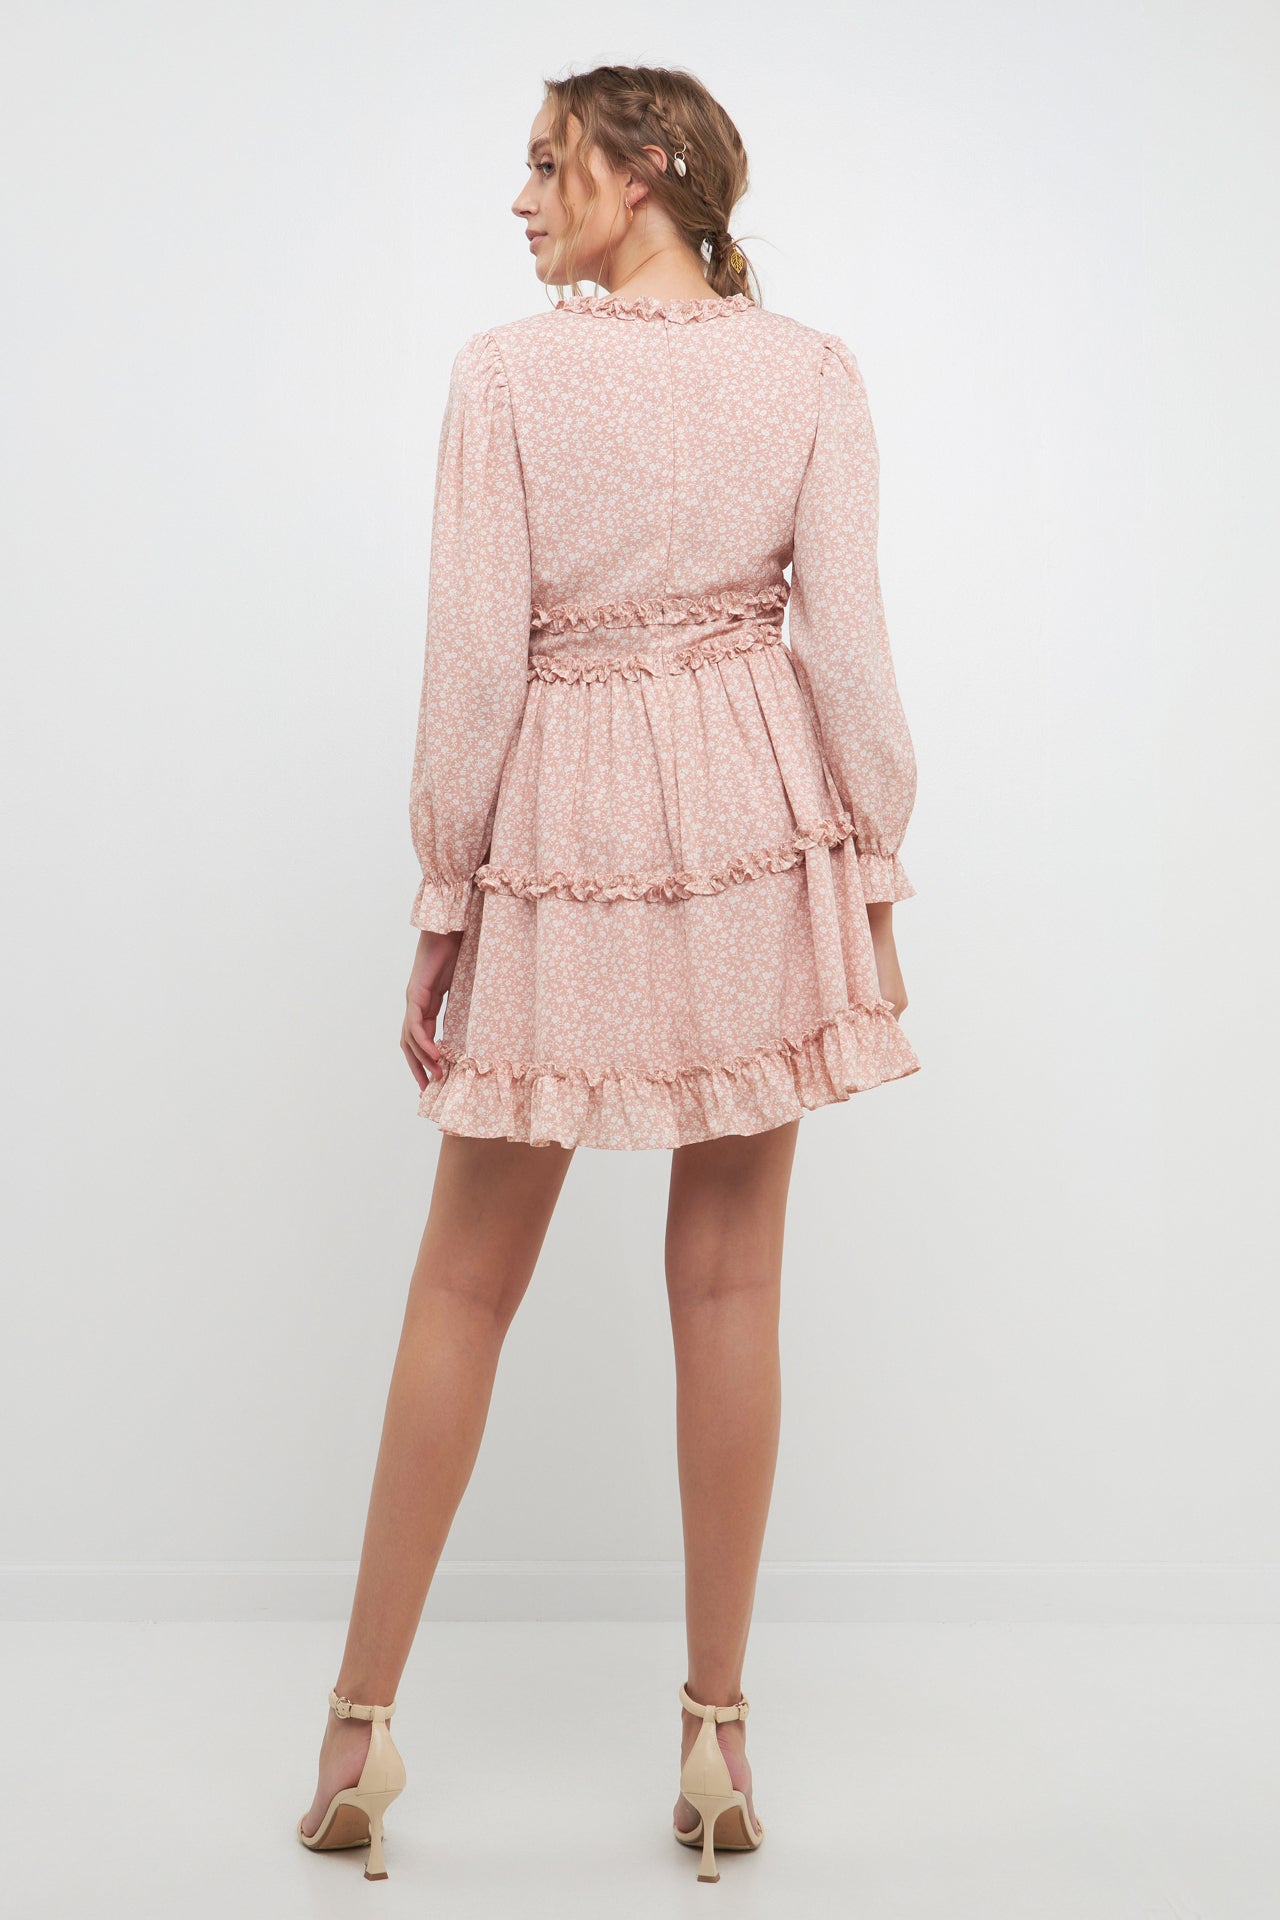 FREE THE ROSES - Floral Ruffle Detail Mini Dress - DRESSES available at Objectrare